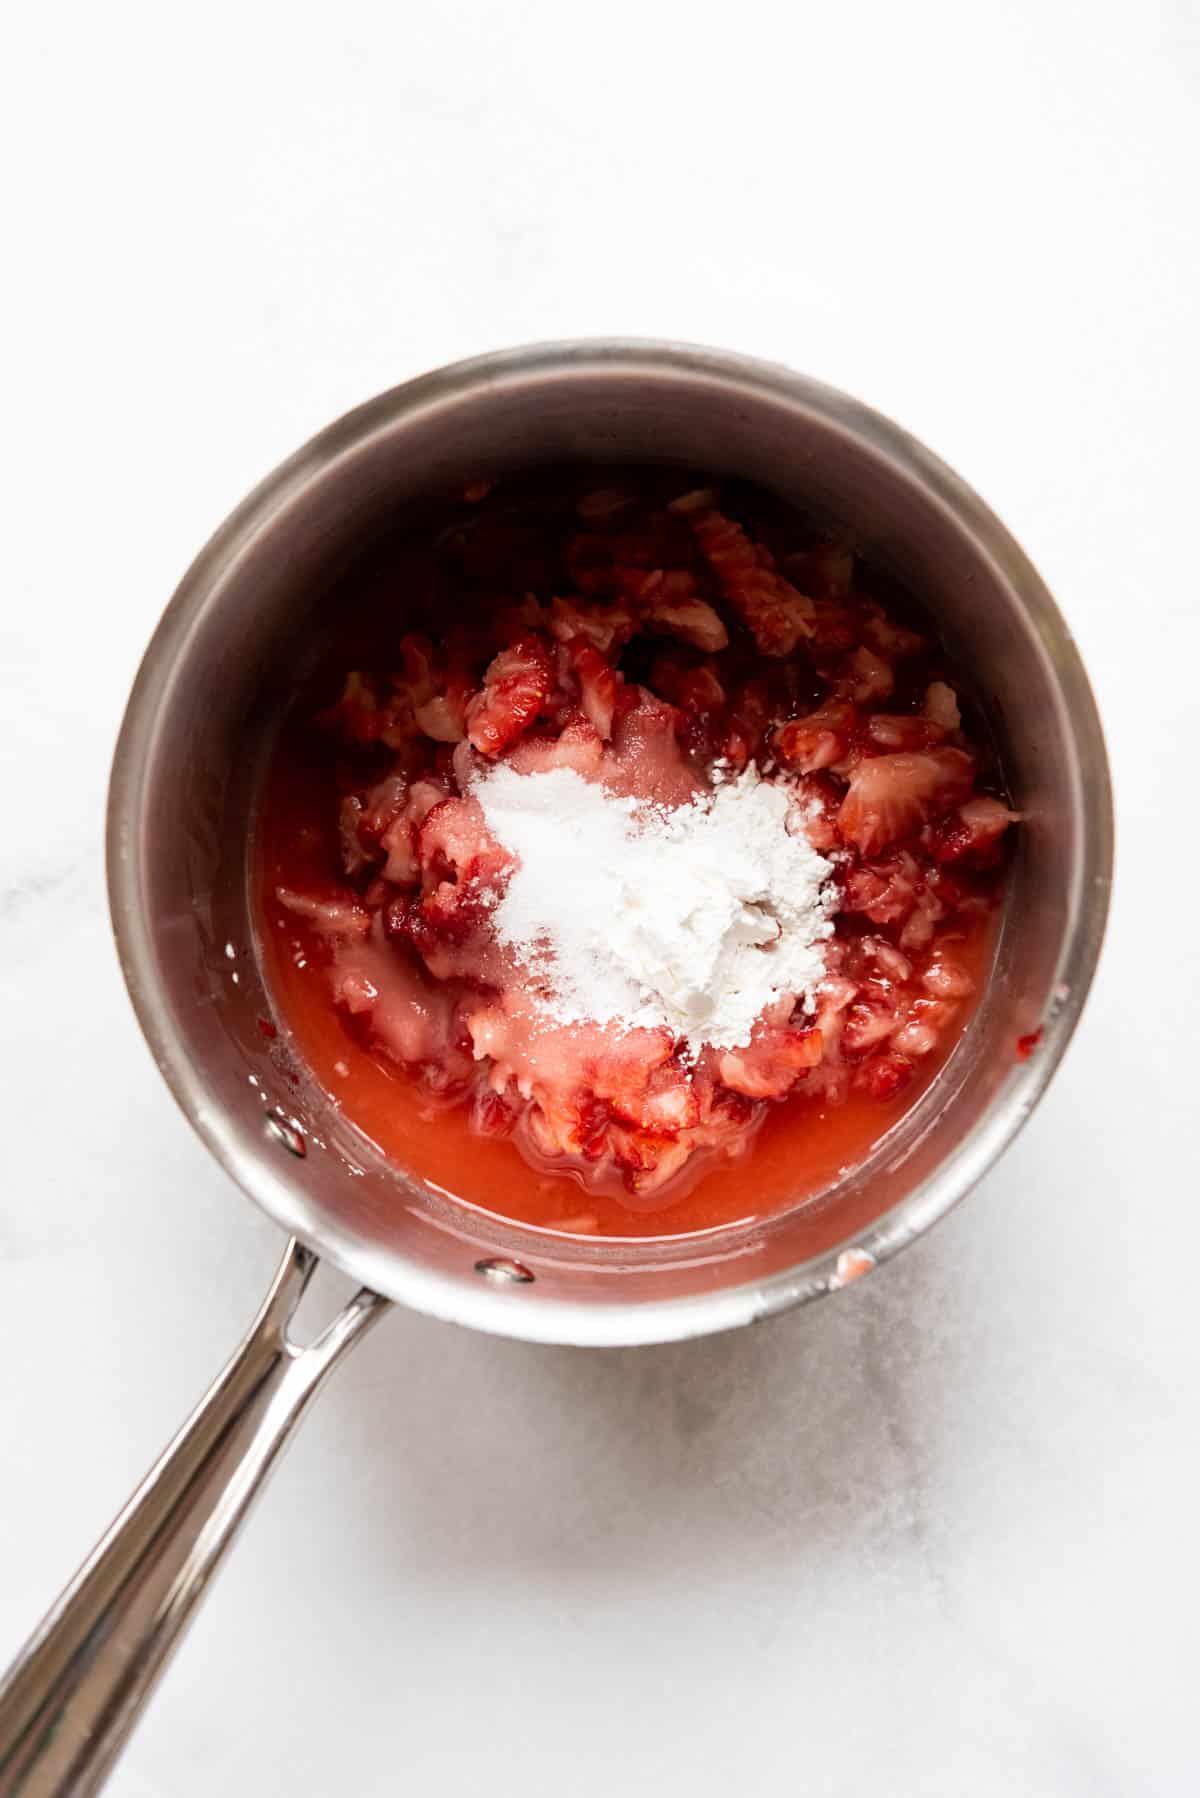 Top view of a saucepan with strawberries, sugar, and cornstarch in it.